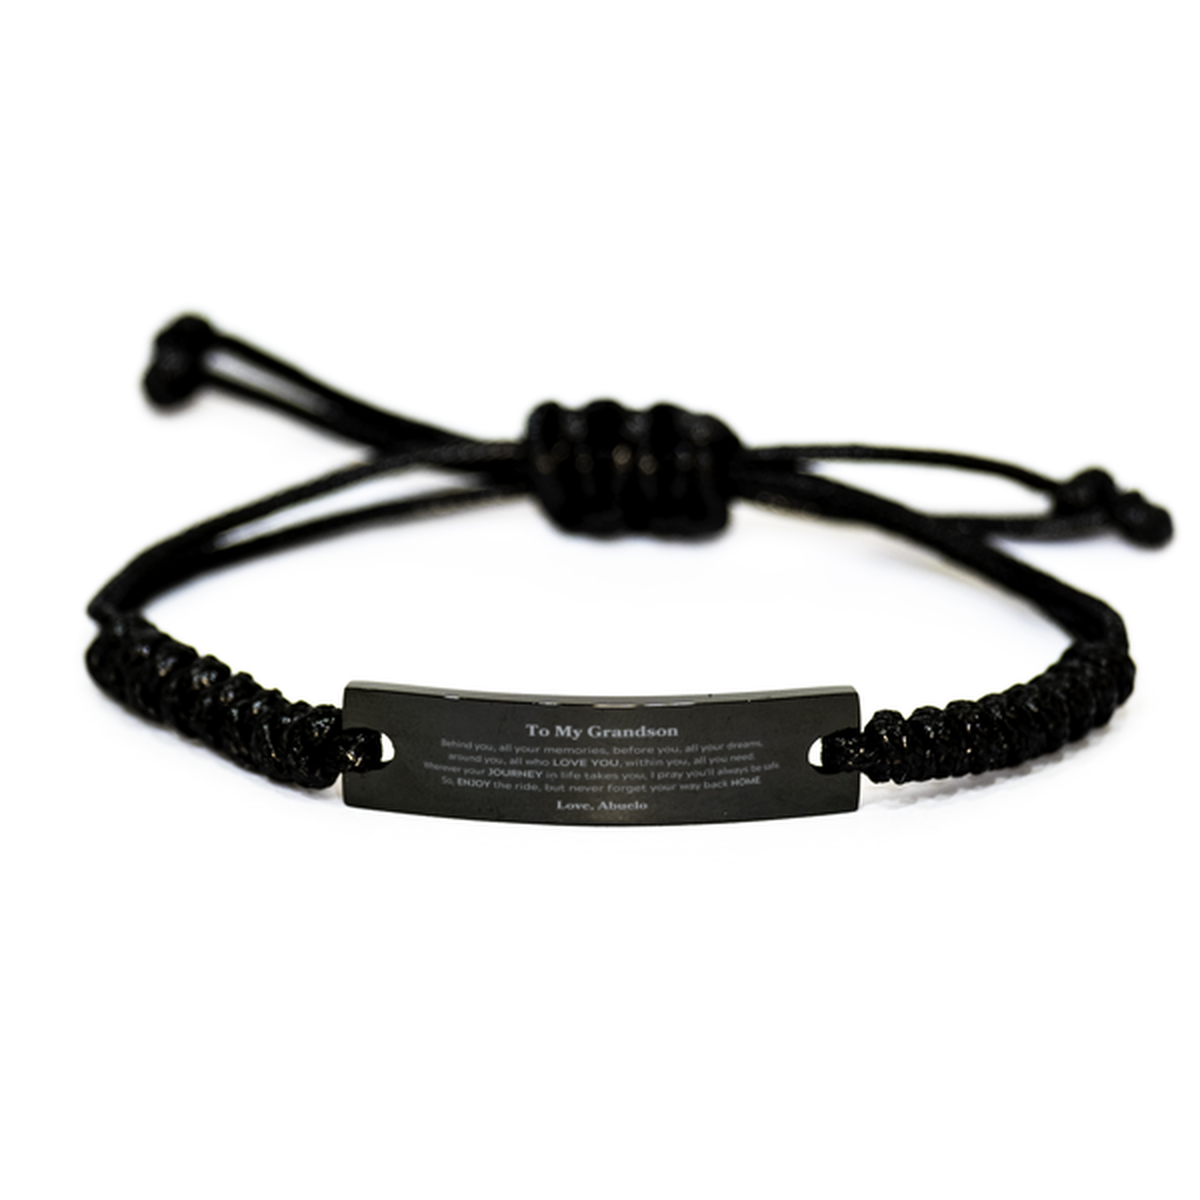 To My Grandson Graduation Gifts from Abuelo, Grandson Black Rope Bracelet Christmas Birthday Gifts for Grandson Behind you, all your memories, before you, all your dreams. Love, Abuelo